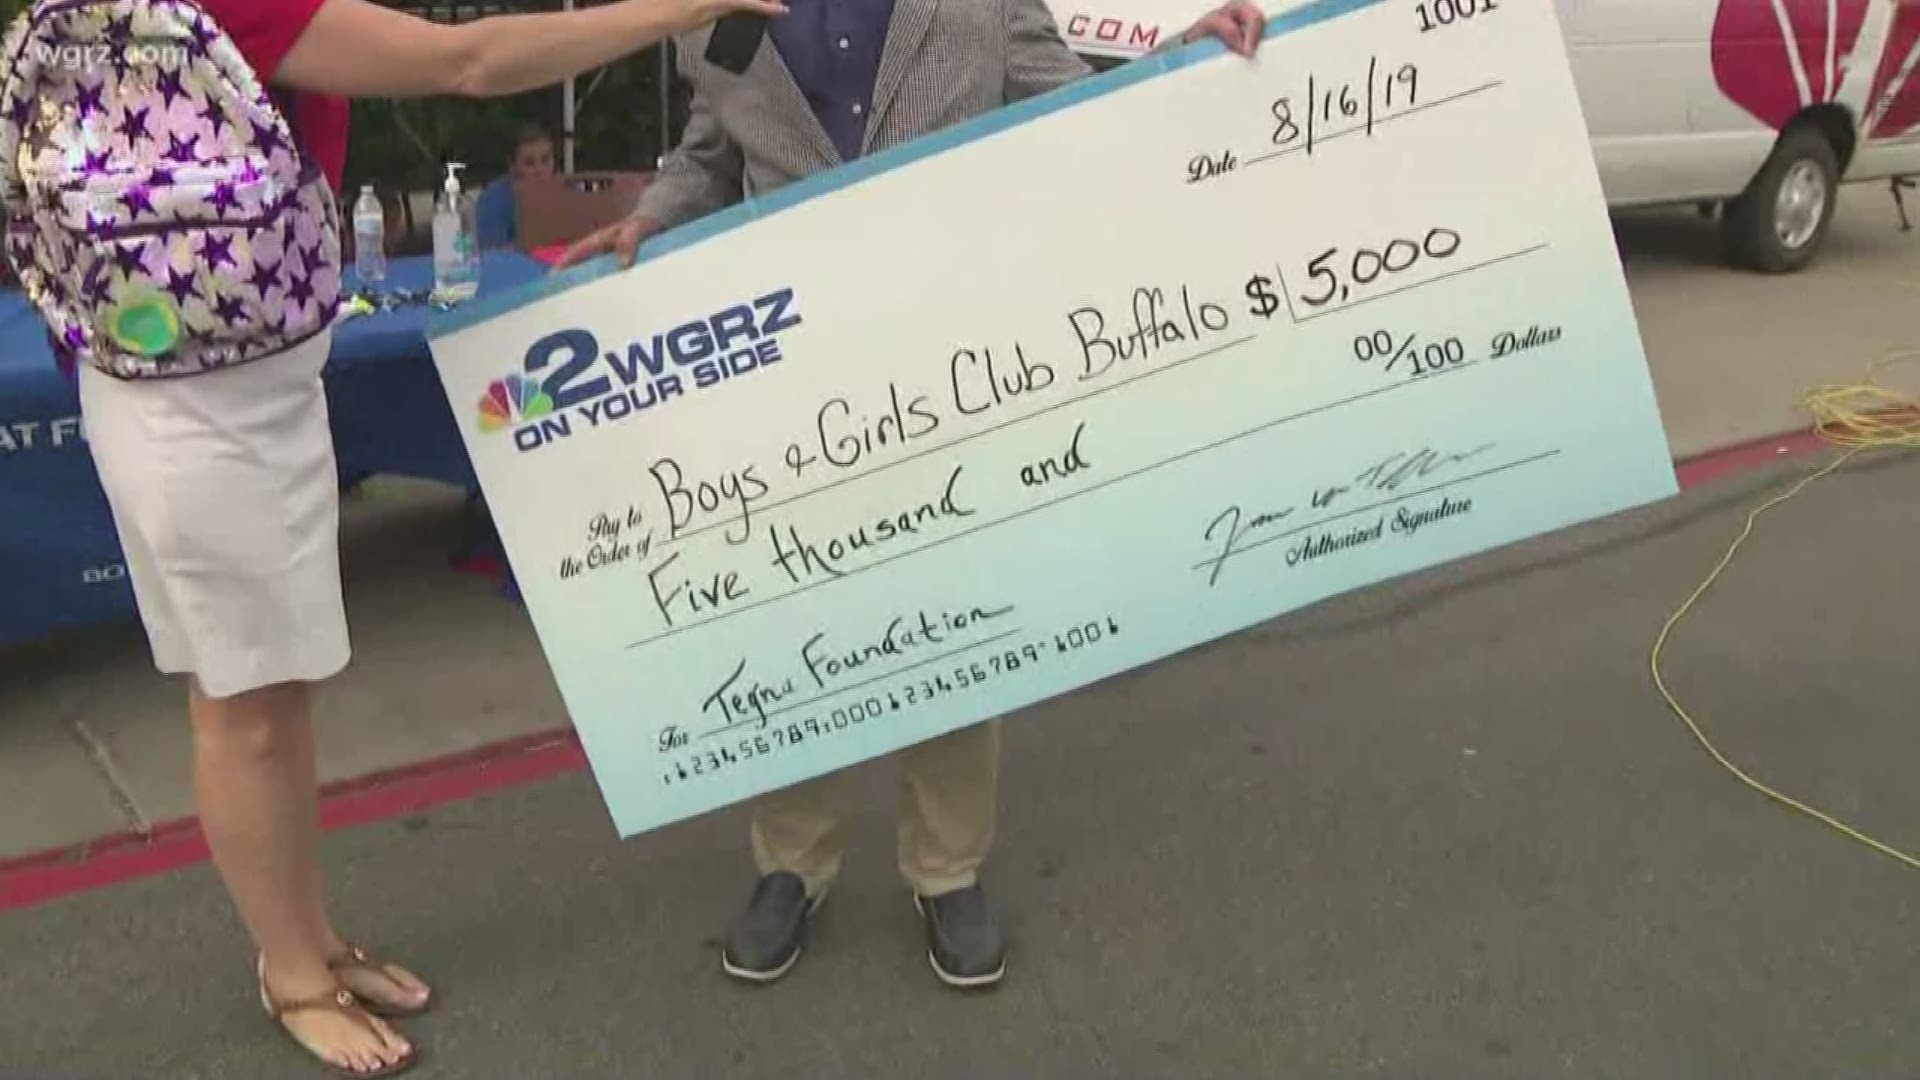 Channel 2 Donates $5000.00 to the Boys And Girls Club Of Buffalo